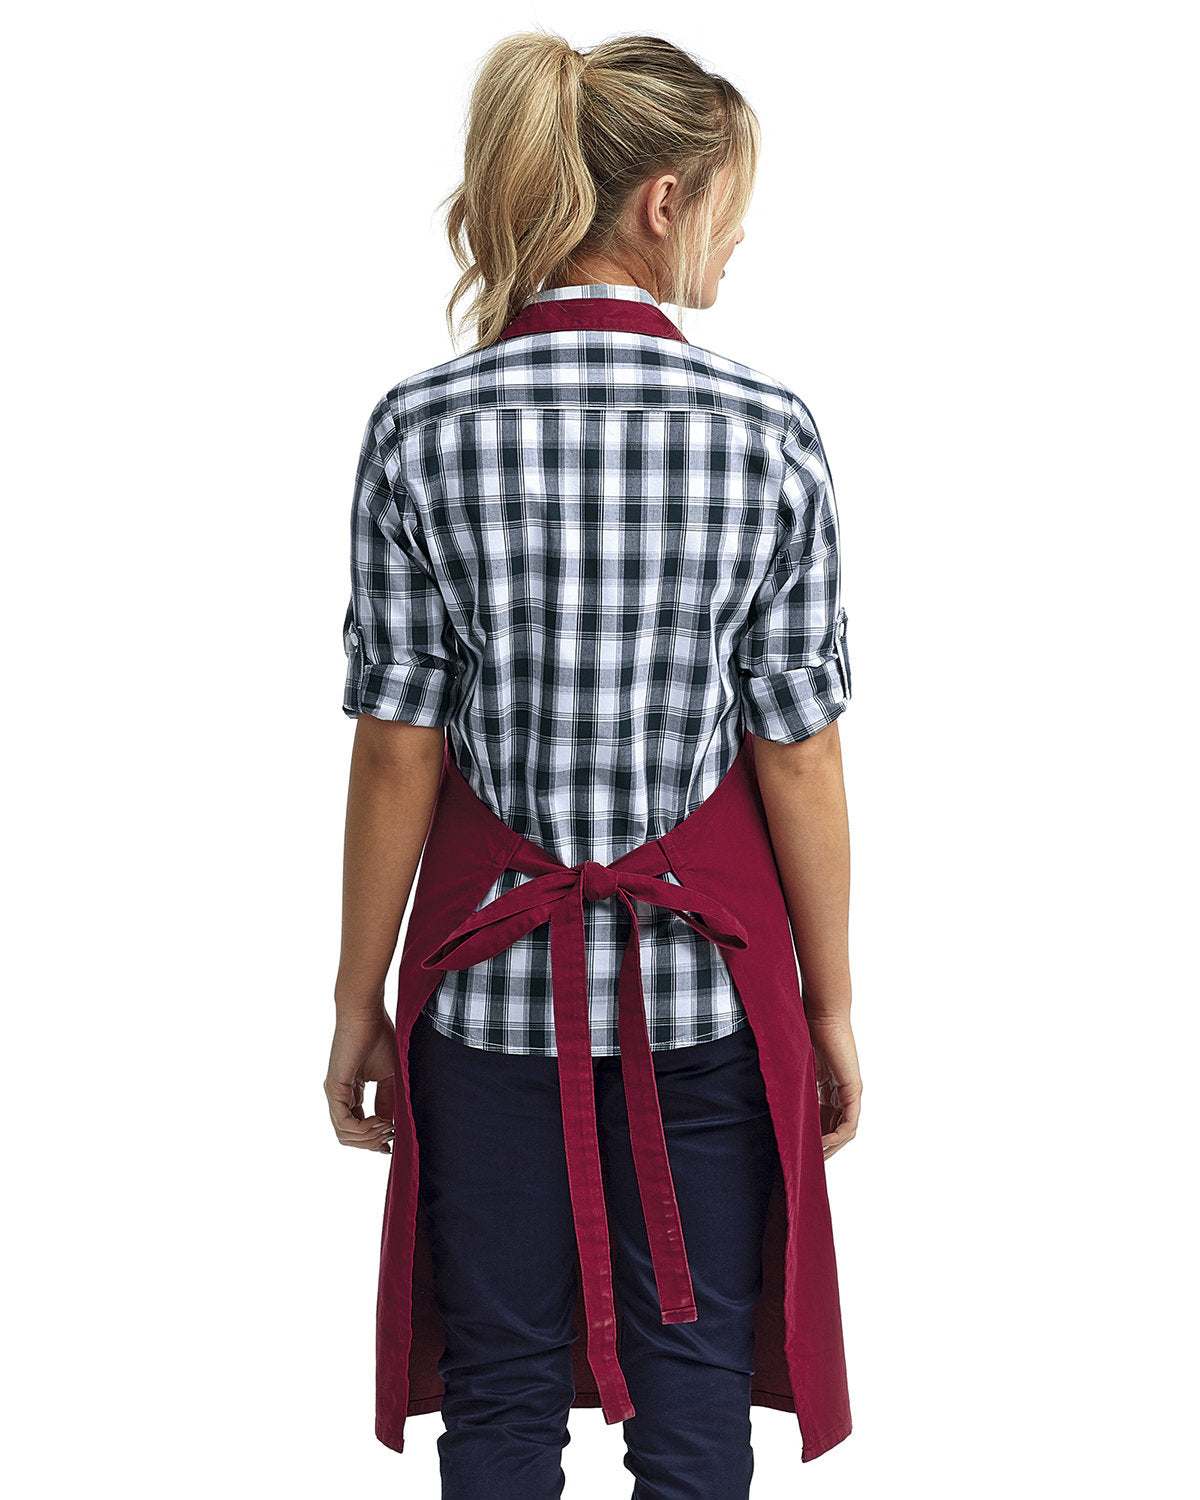 Unisex Pocket Apron Your Personalized Text Embroidered - 3 pack - burgundy